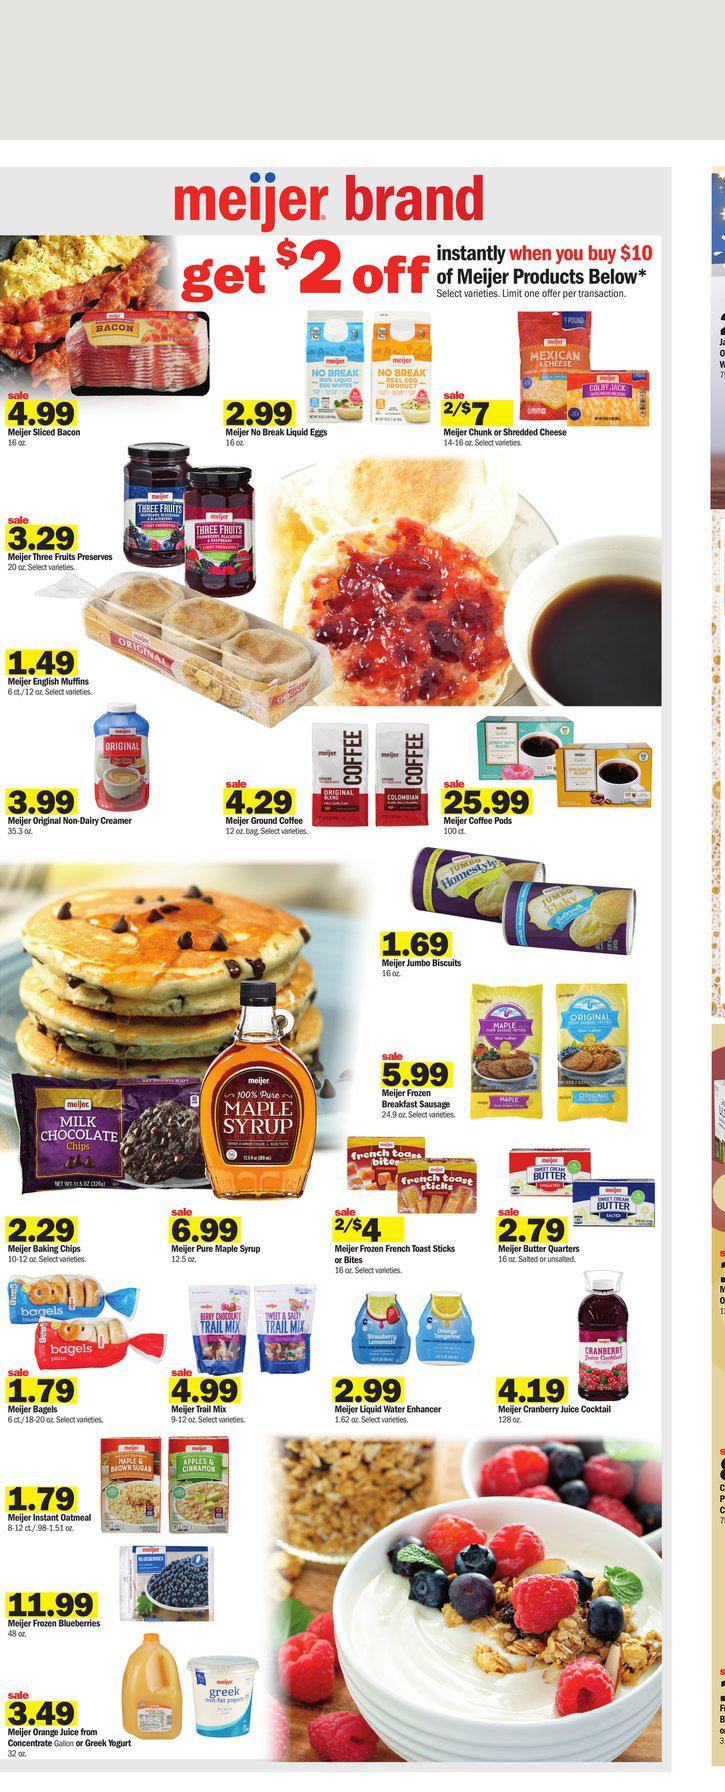 09.01.2022 Meijer ad 10. page